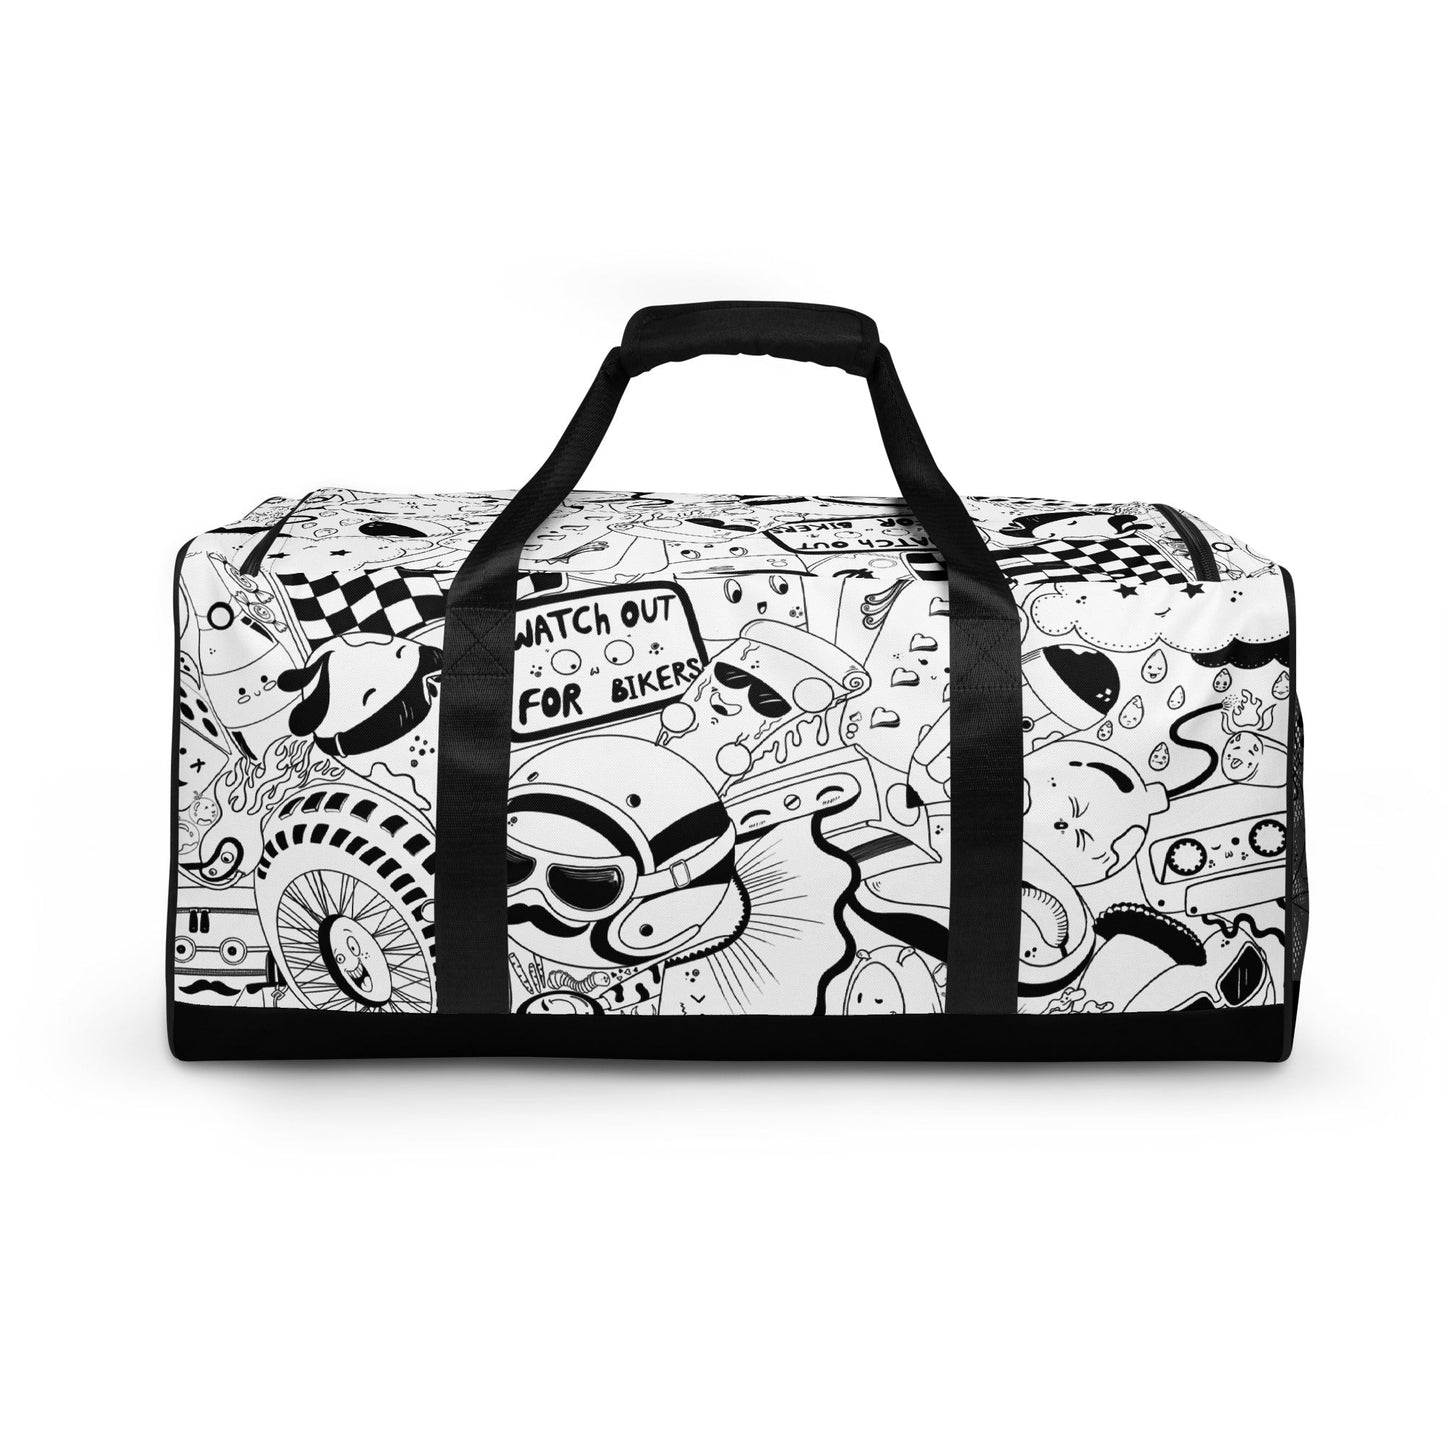 duffle-bag-watch-out-for-bikers-white